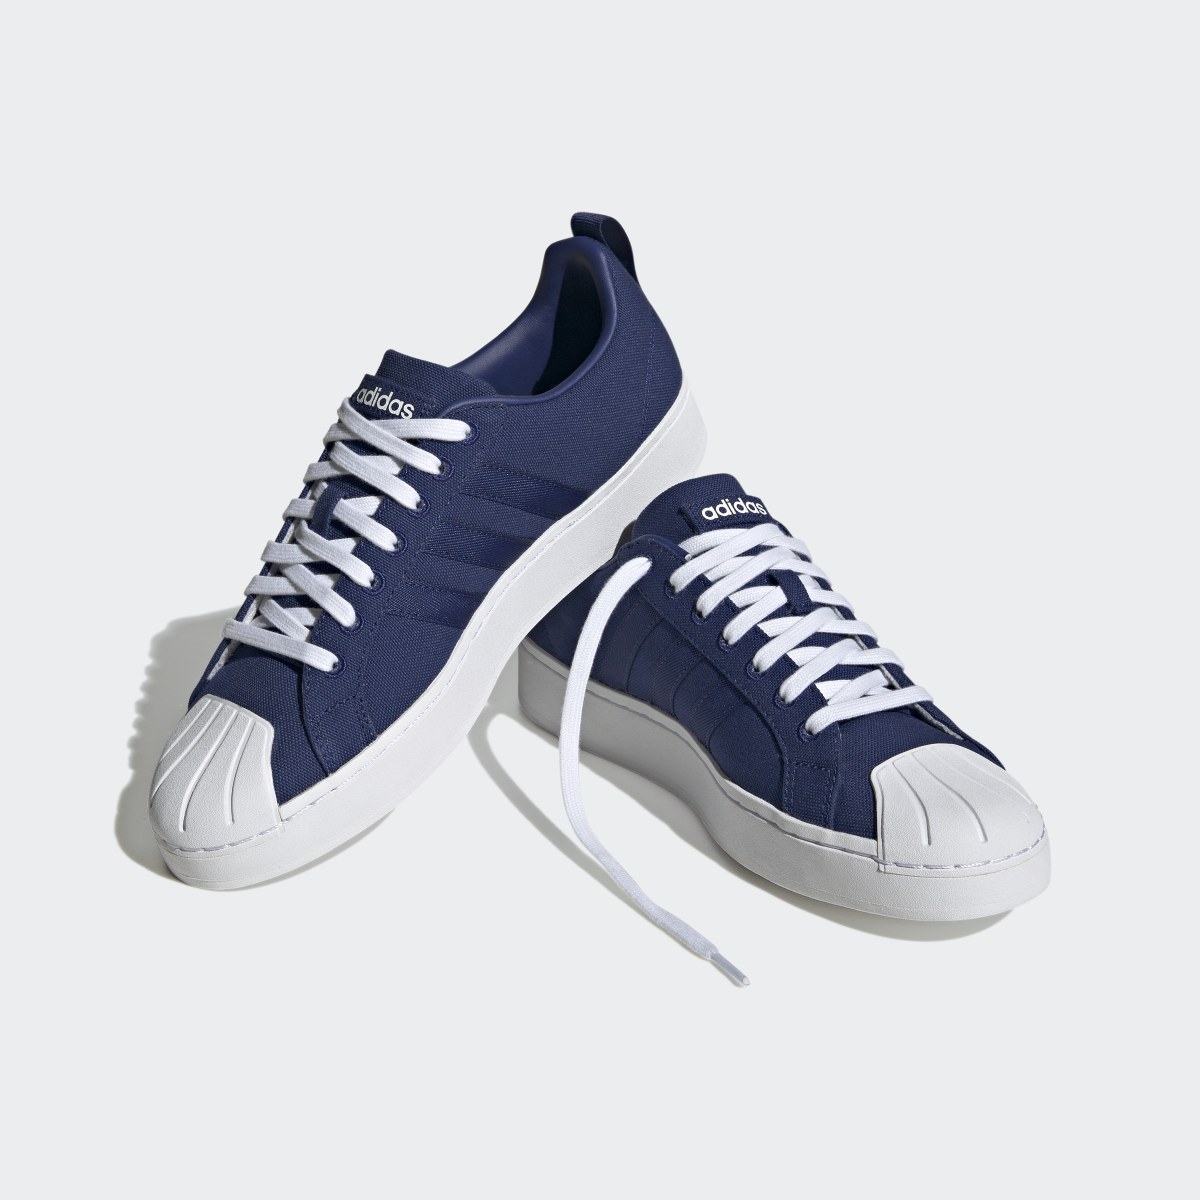 Adidas Streetcheck Cloudfoam Lifestyle Low Court Shoes. 5